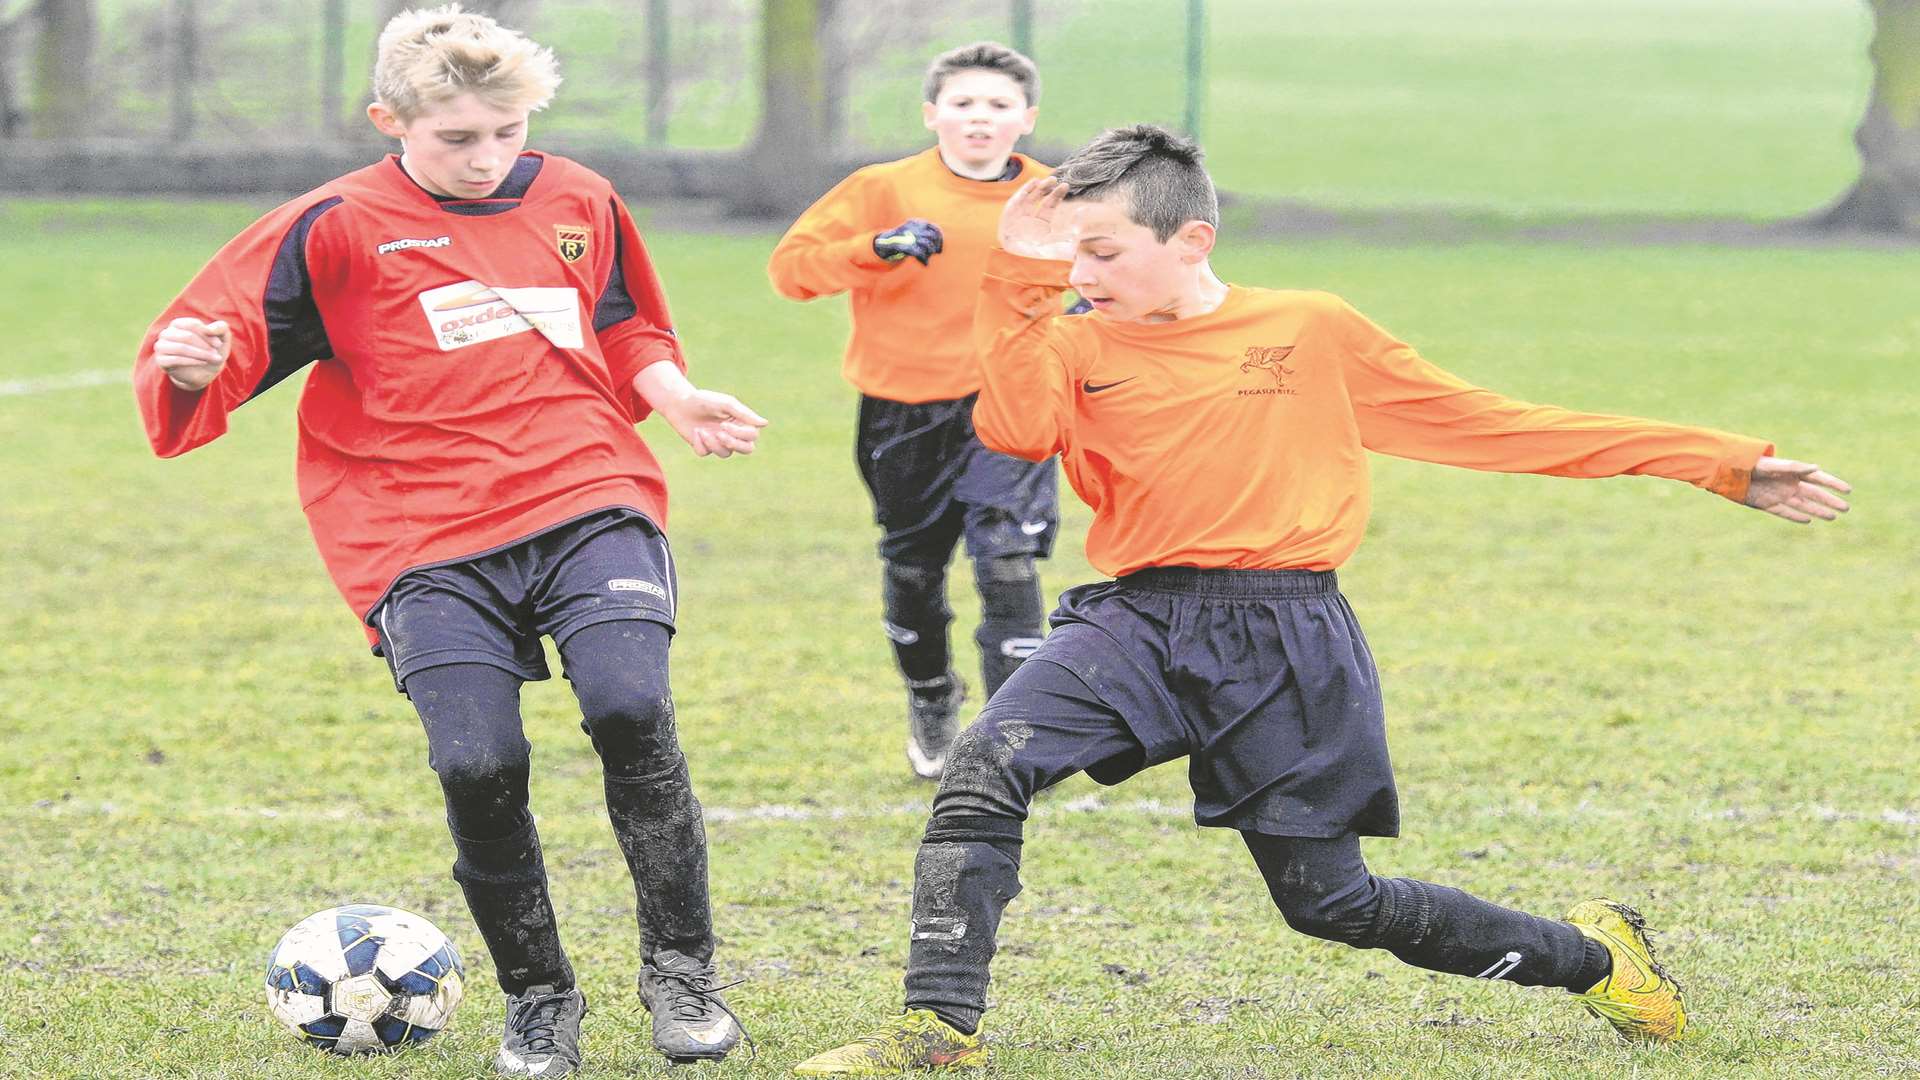 Rainham 84 under-12s, red, in action against Pegasus 81 Flyers under-12s on Sunday. Picture: Gary Browne FM3652409